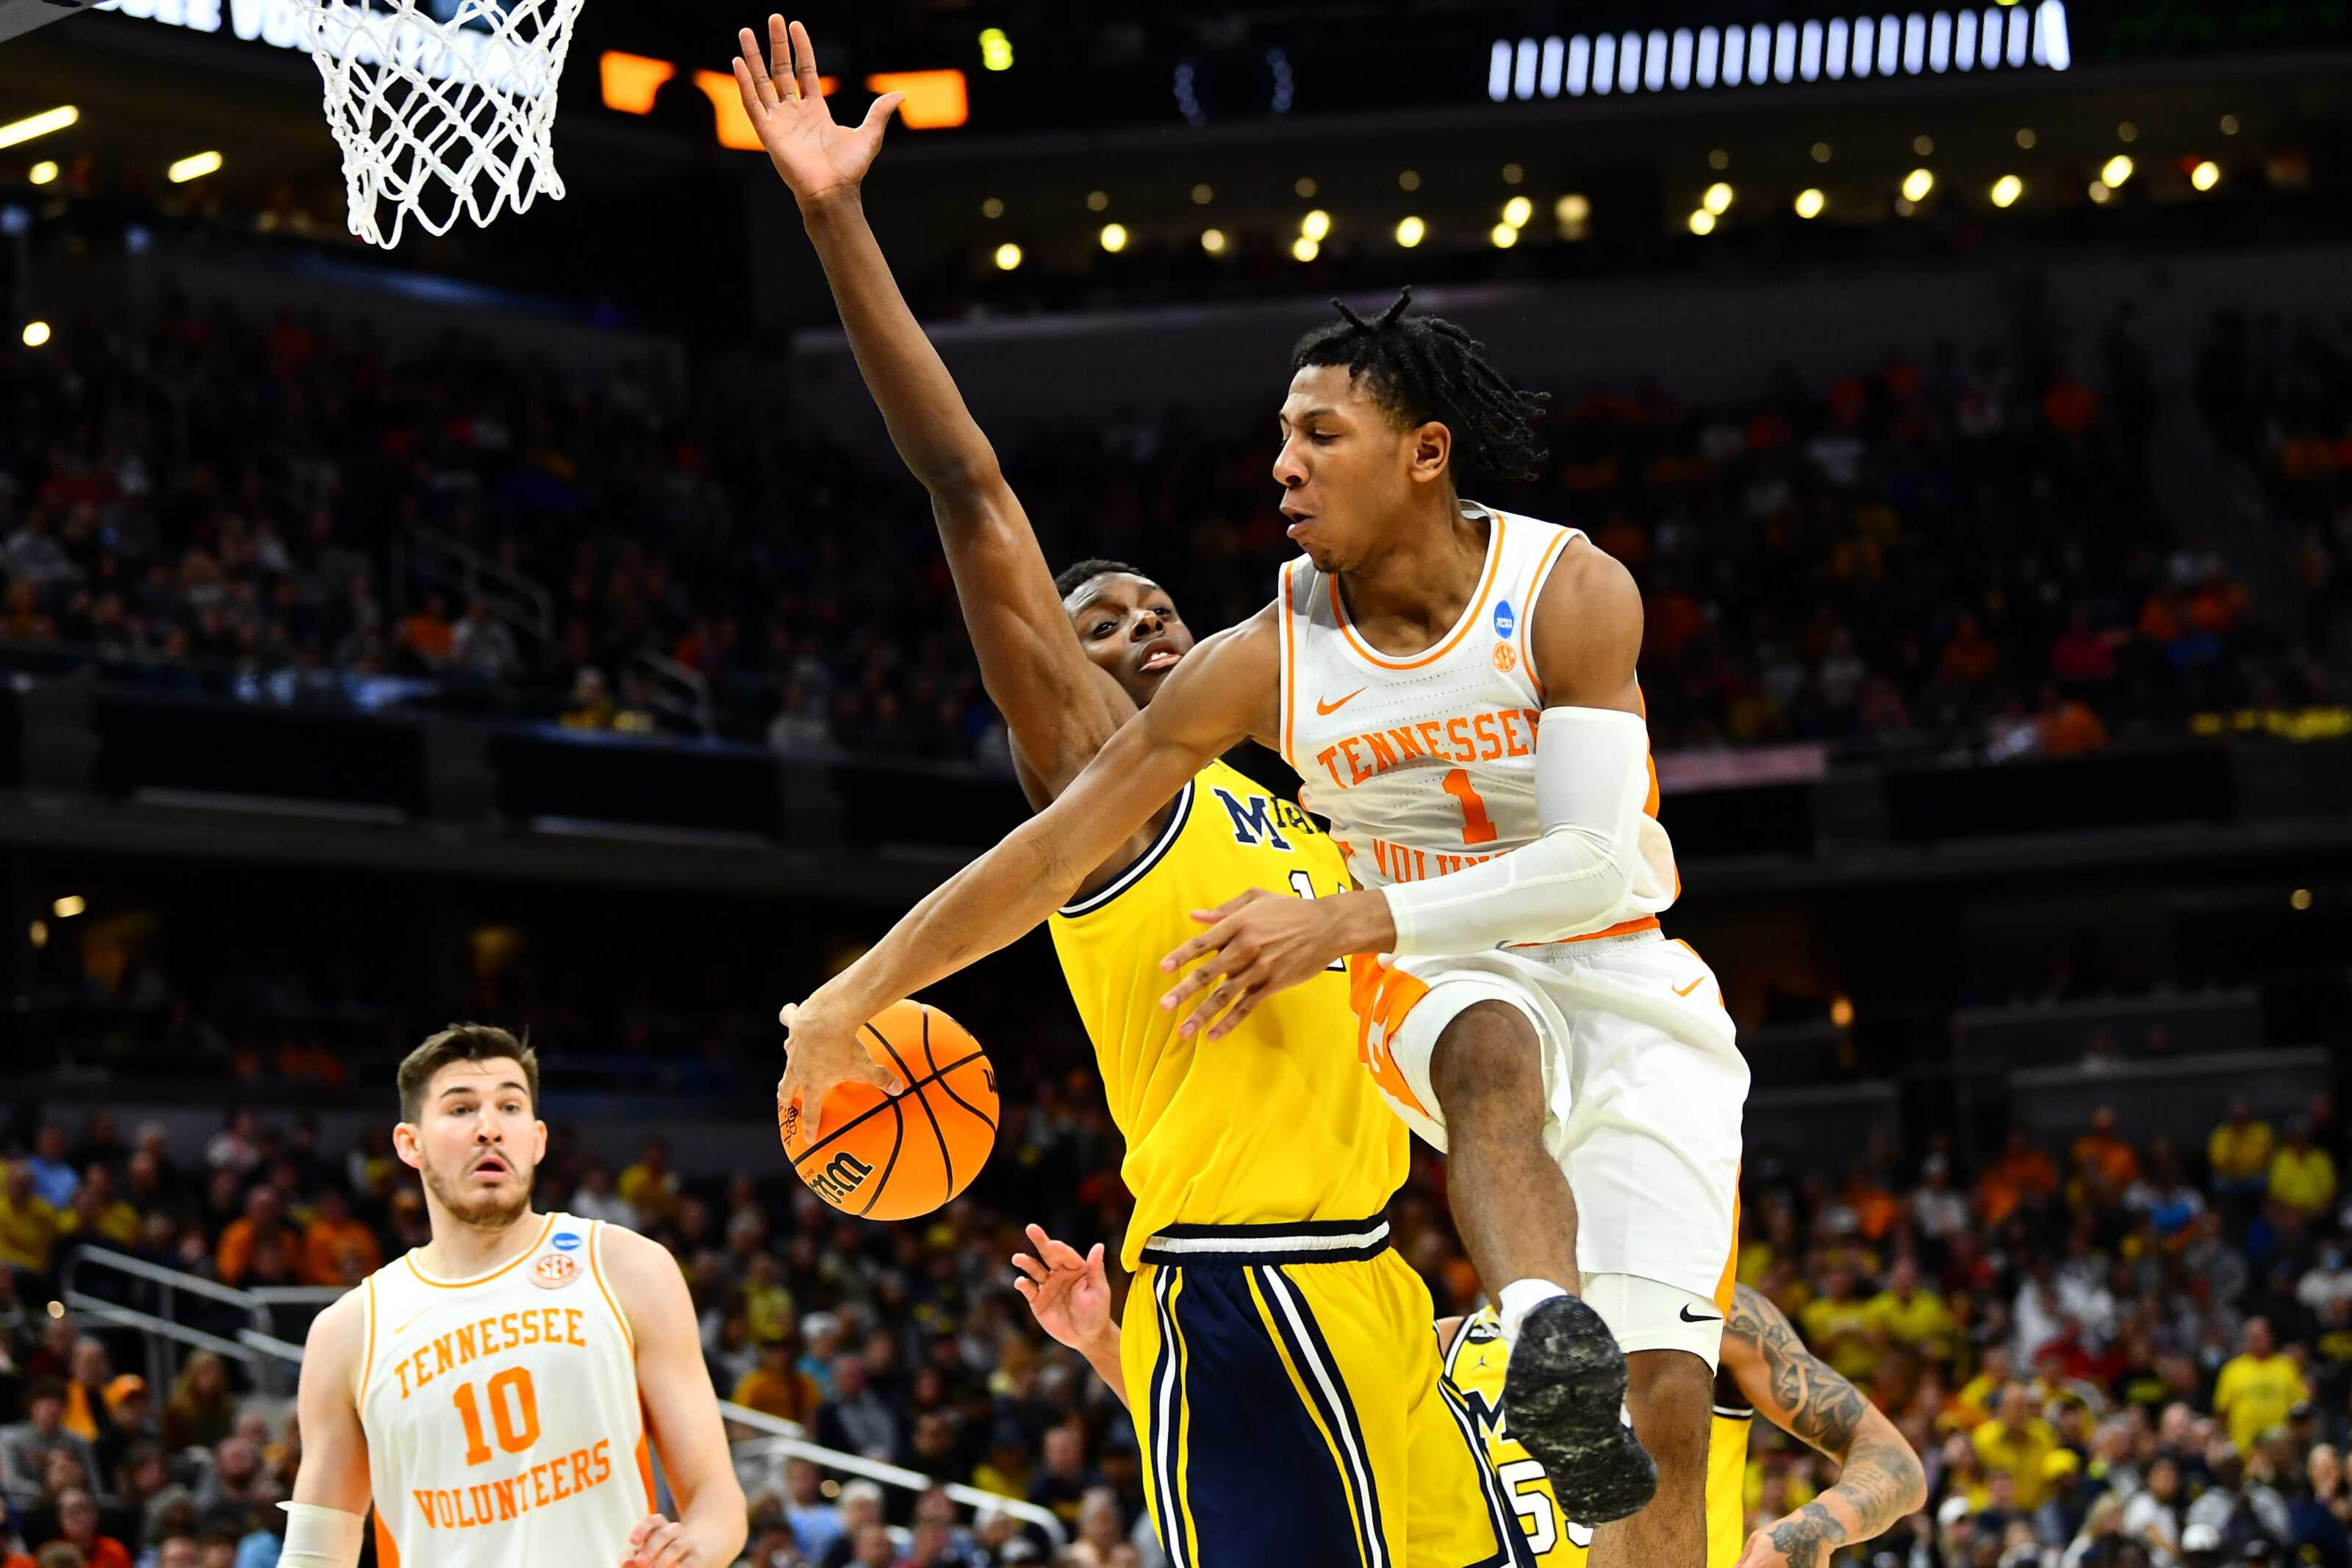 2022 NBA Dradt Profile: could Tennessee's Kennedy Chandler